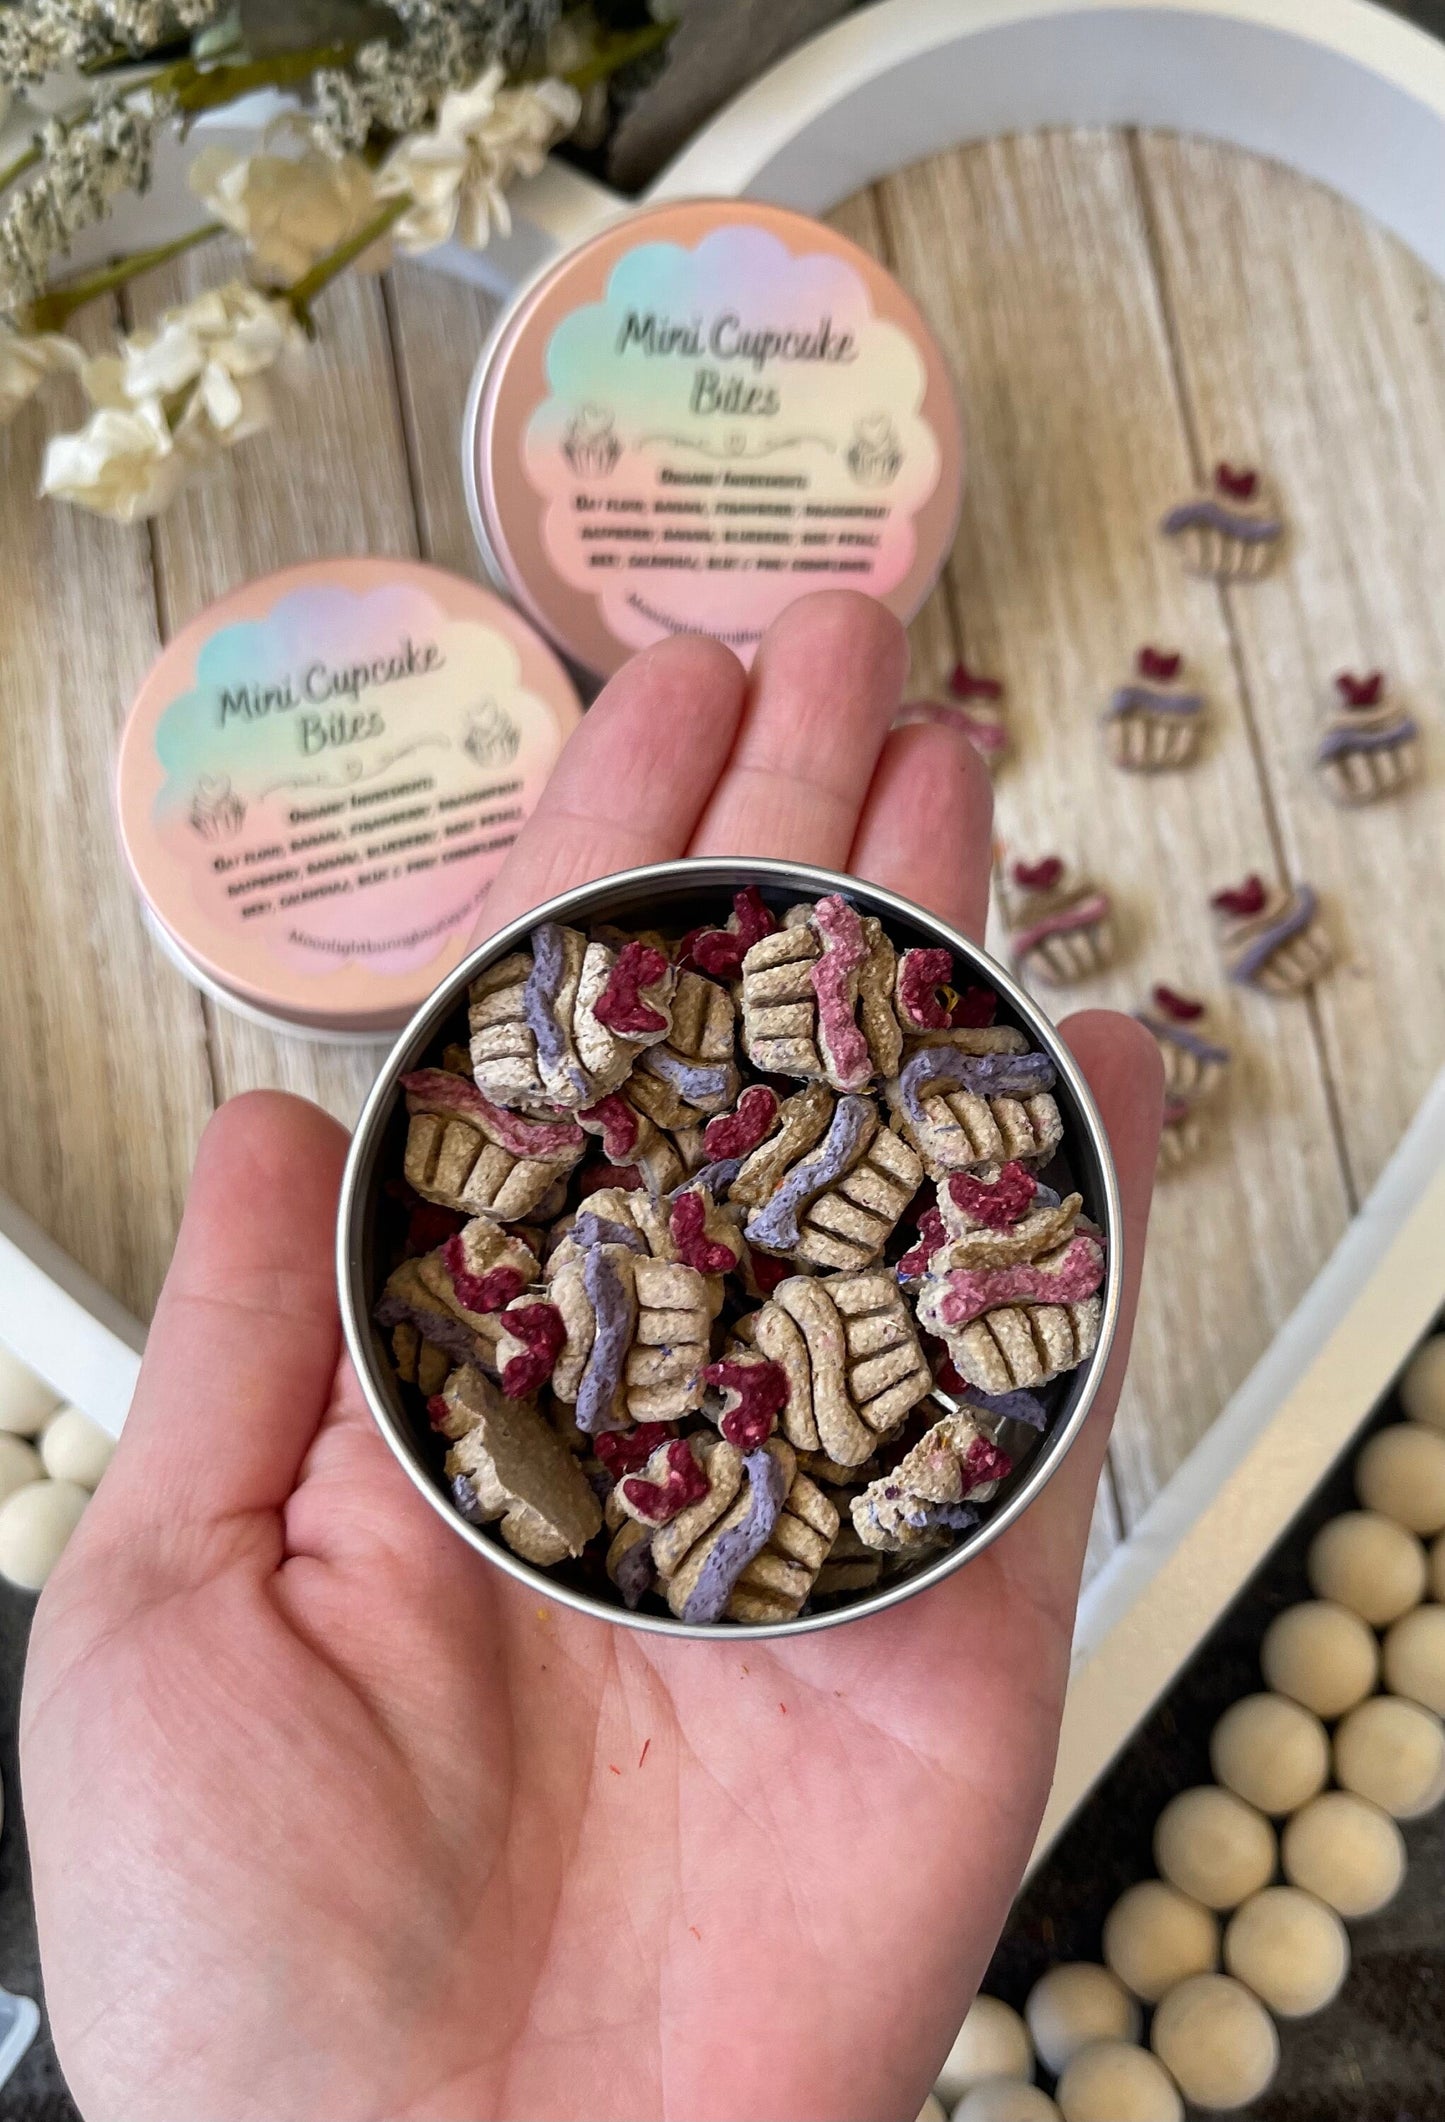 Mini Cupcake Bites~ Healthy Bite Sized Treats for Rabbits, Guinea Pigs, Hamsters, Mice, and Small Pets, All Natural & Organic Ingredients